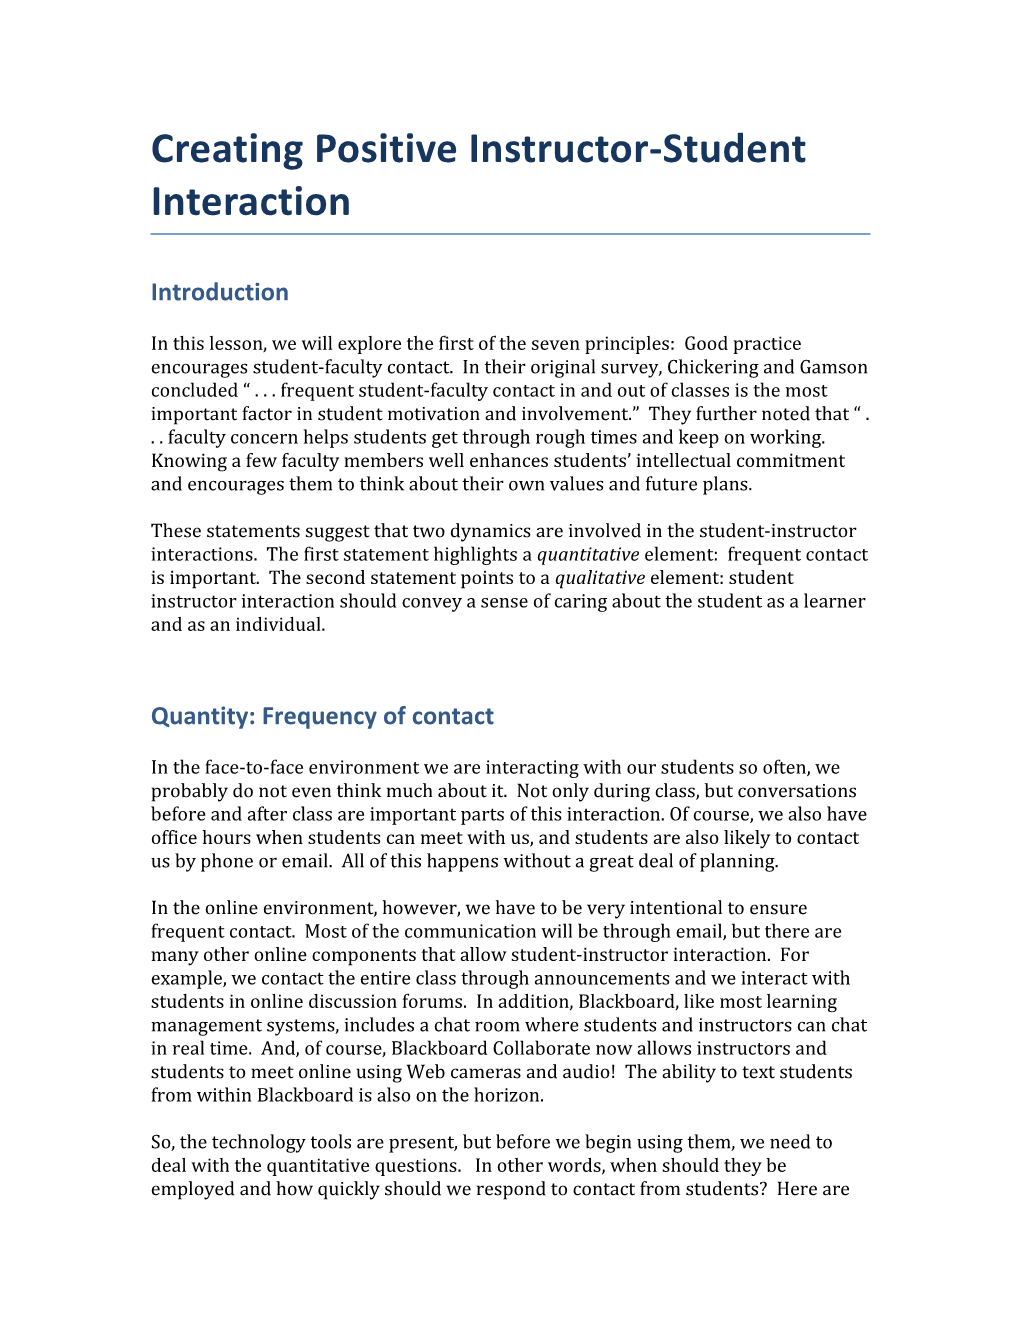 Creating Positive Instructor-Student Interaction